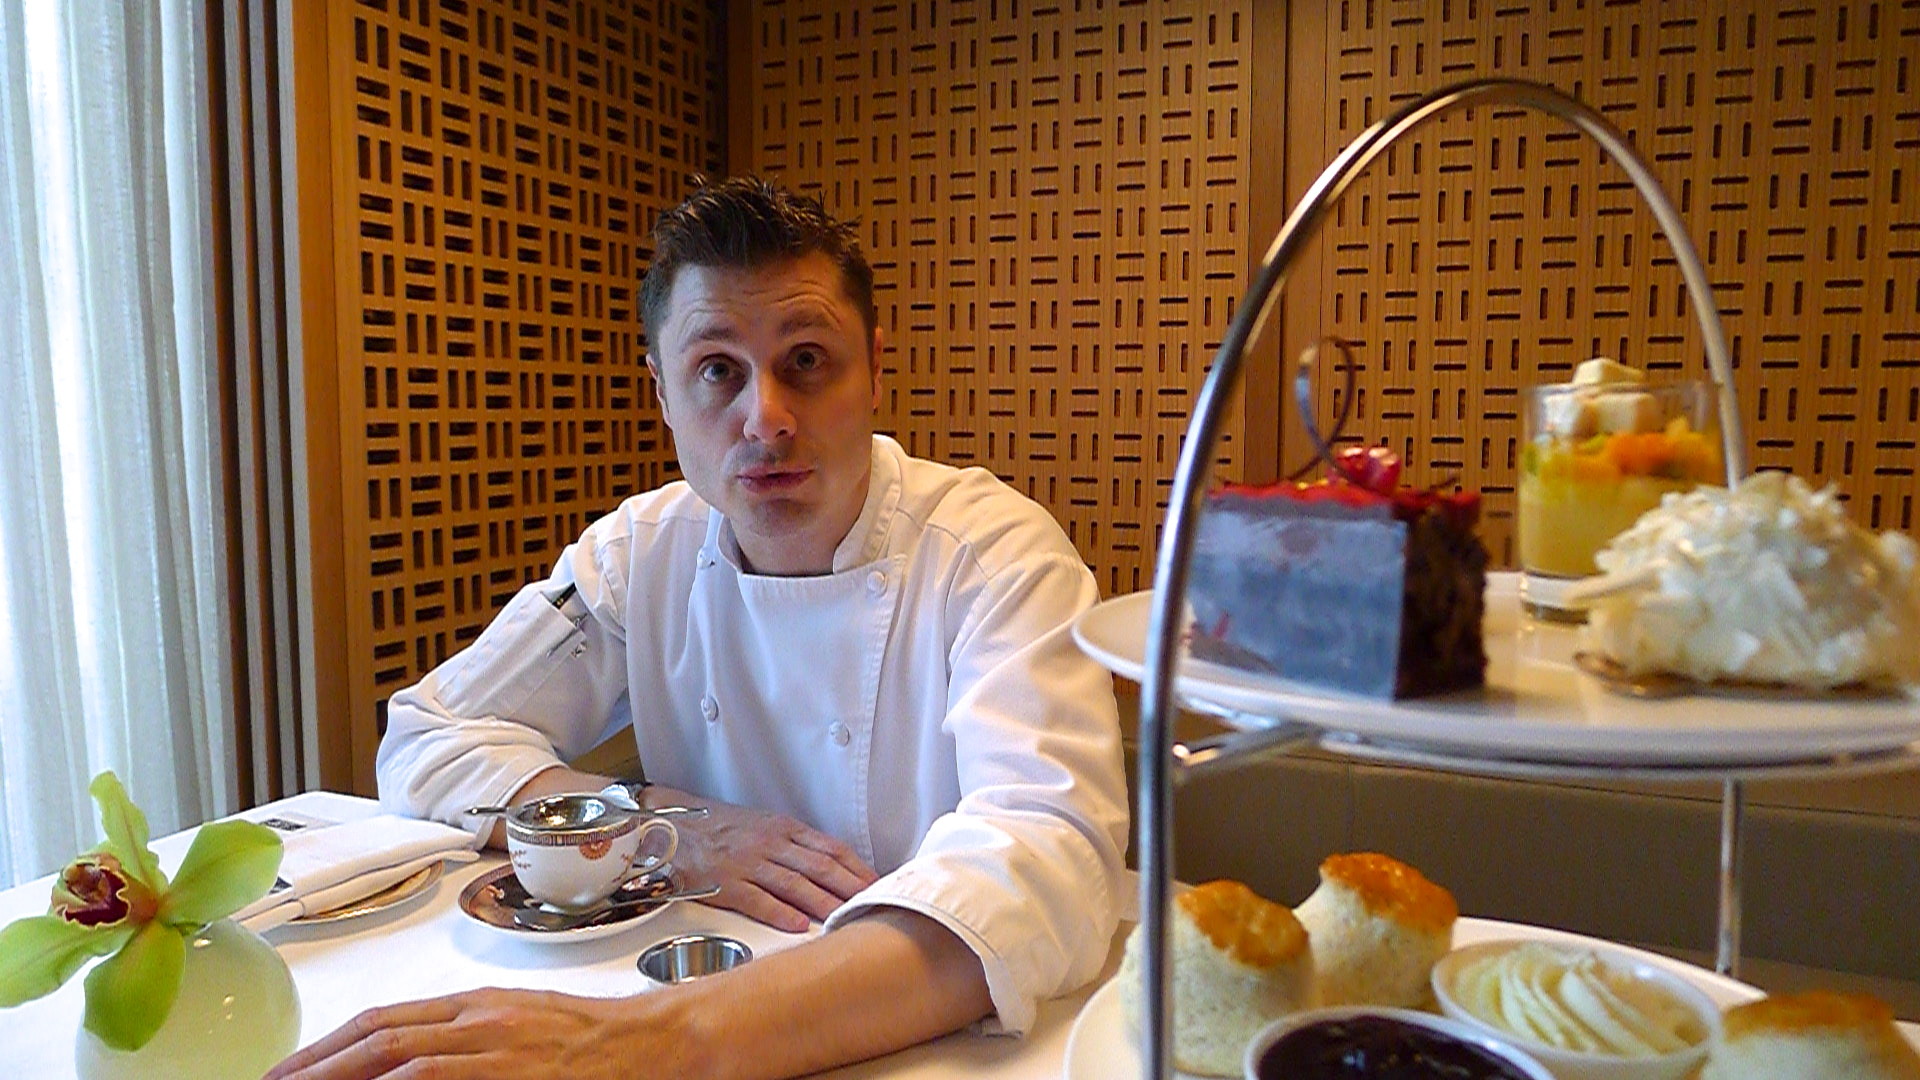 Chef Nicholas Patterson will be at Toronto's Shangri La Hotel until Sunday the 19th of January, but his "London Calling" Afternoon Tea menu will continue after that date.